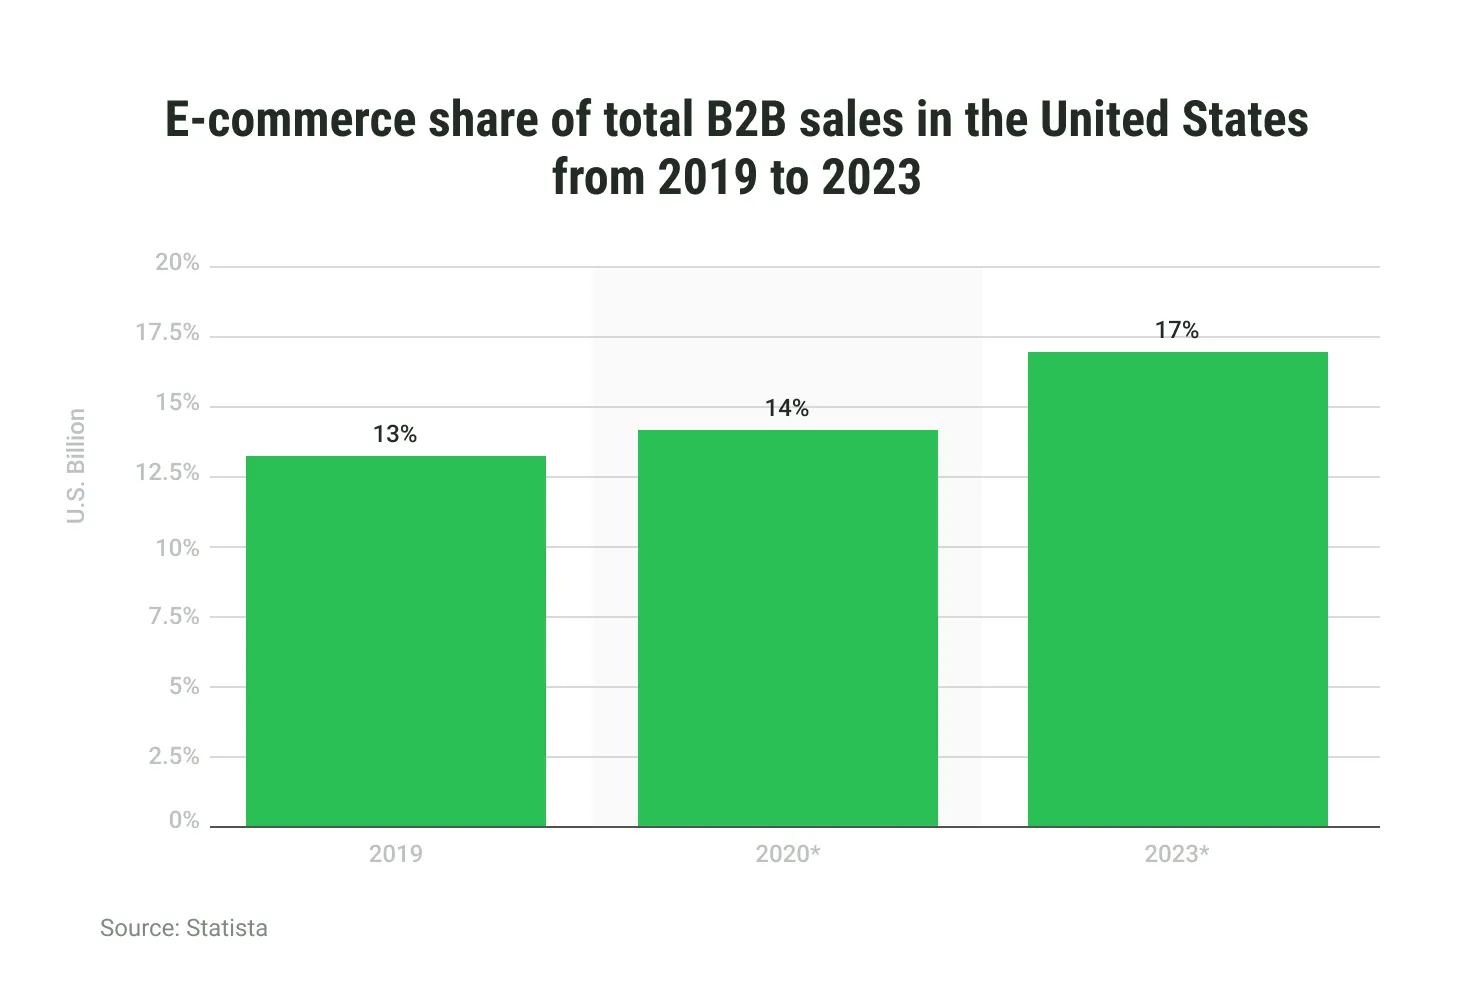 E-commerce share of total B2B sales in the United States from 2019 to 2023